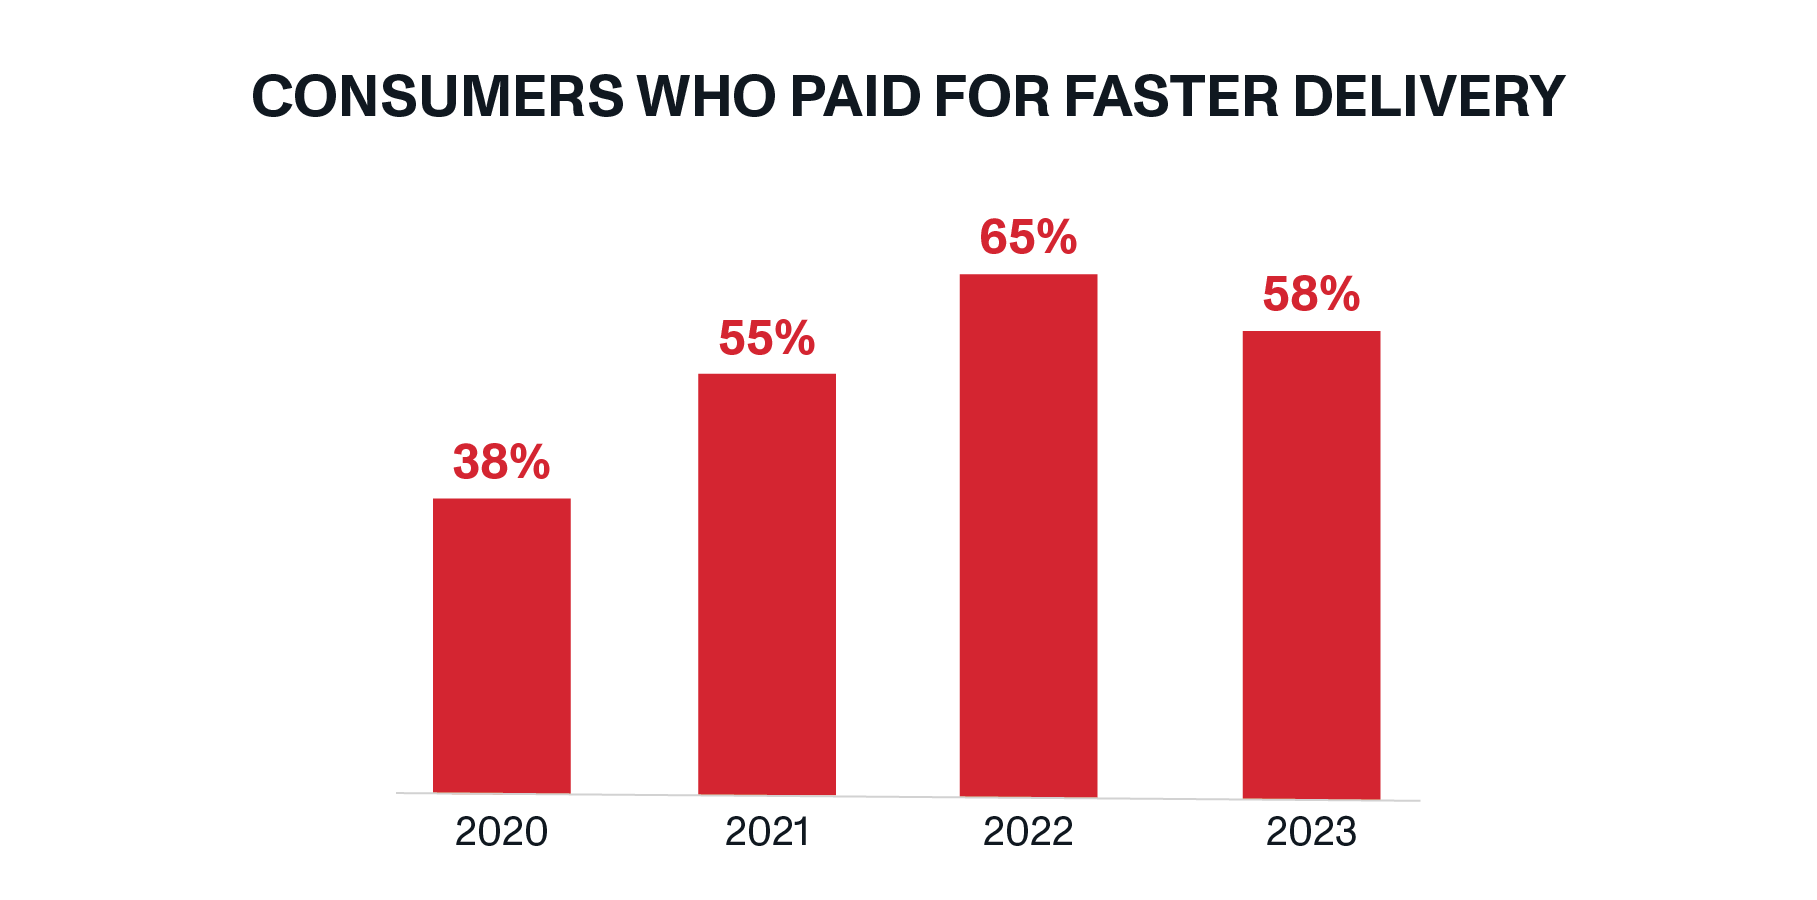 Nearly 60% of consumers have paid extra for faster delivery in 2023.